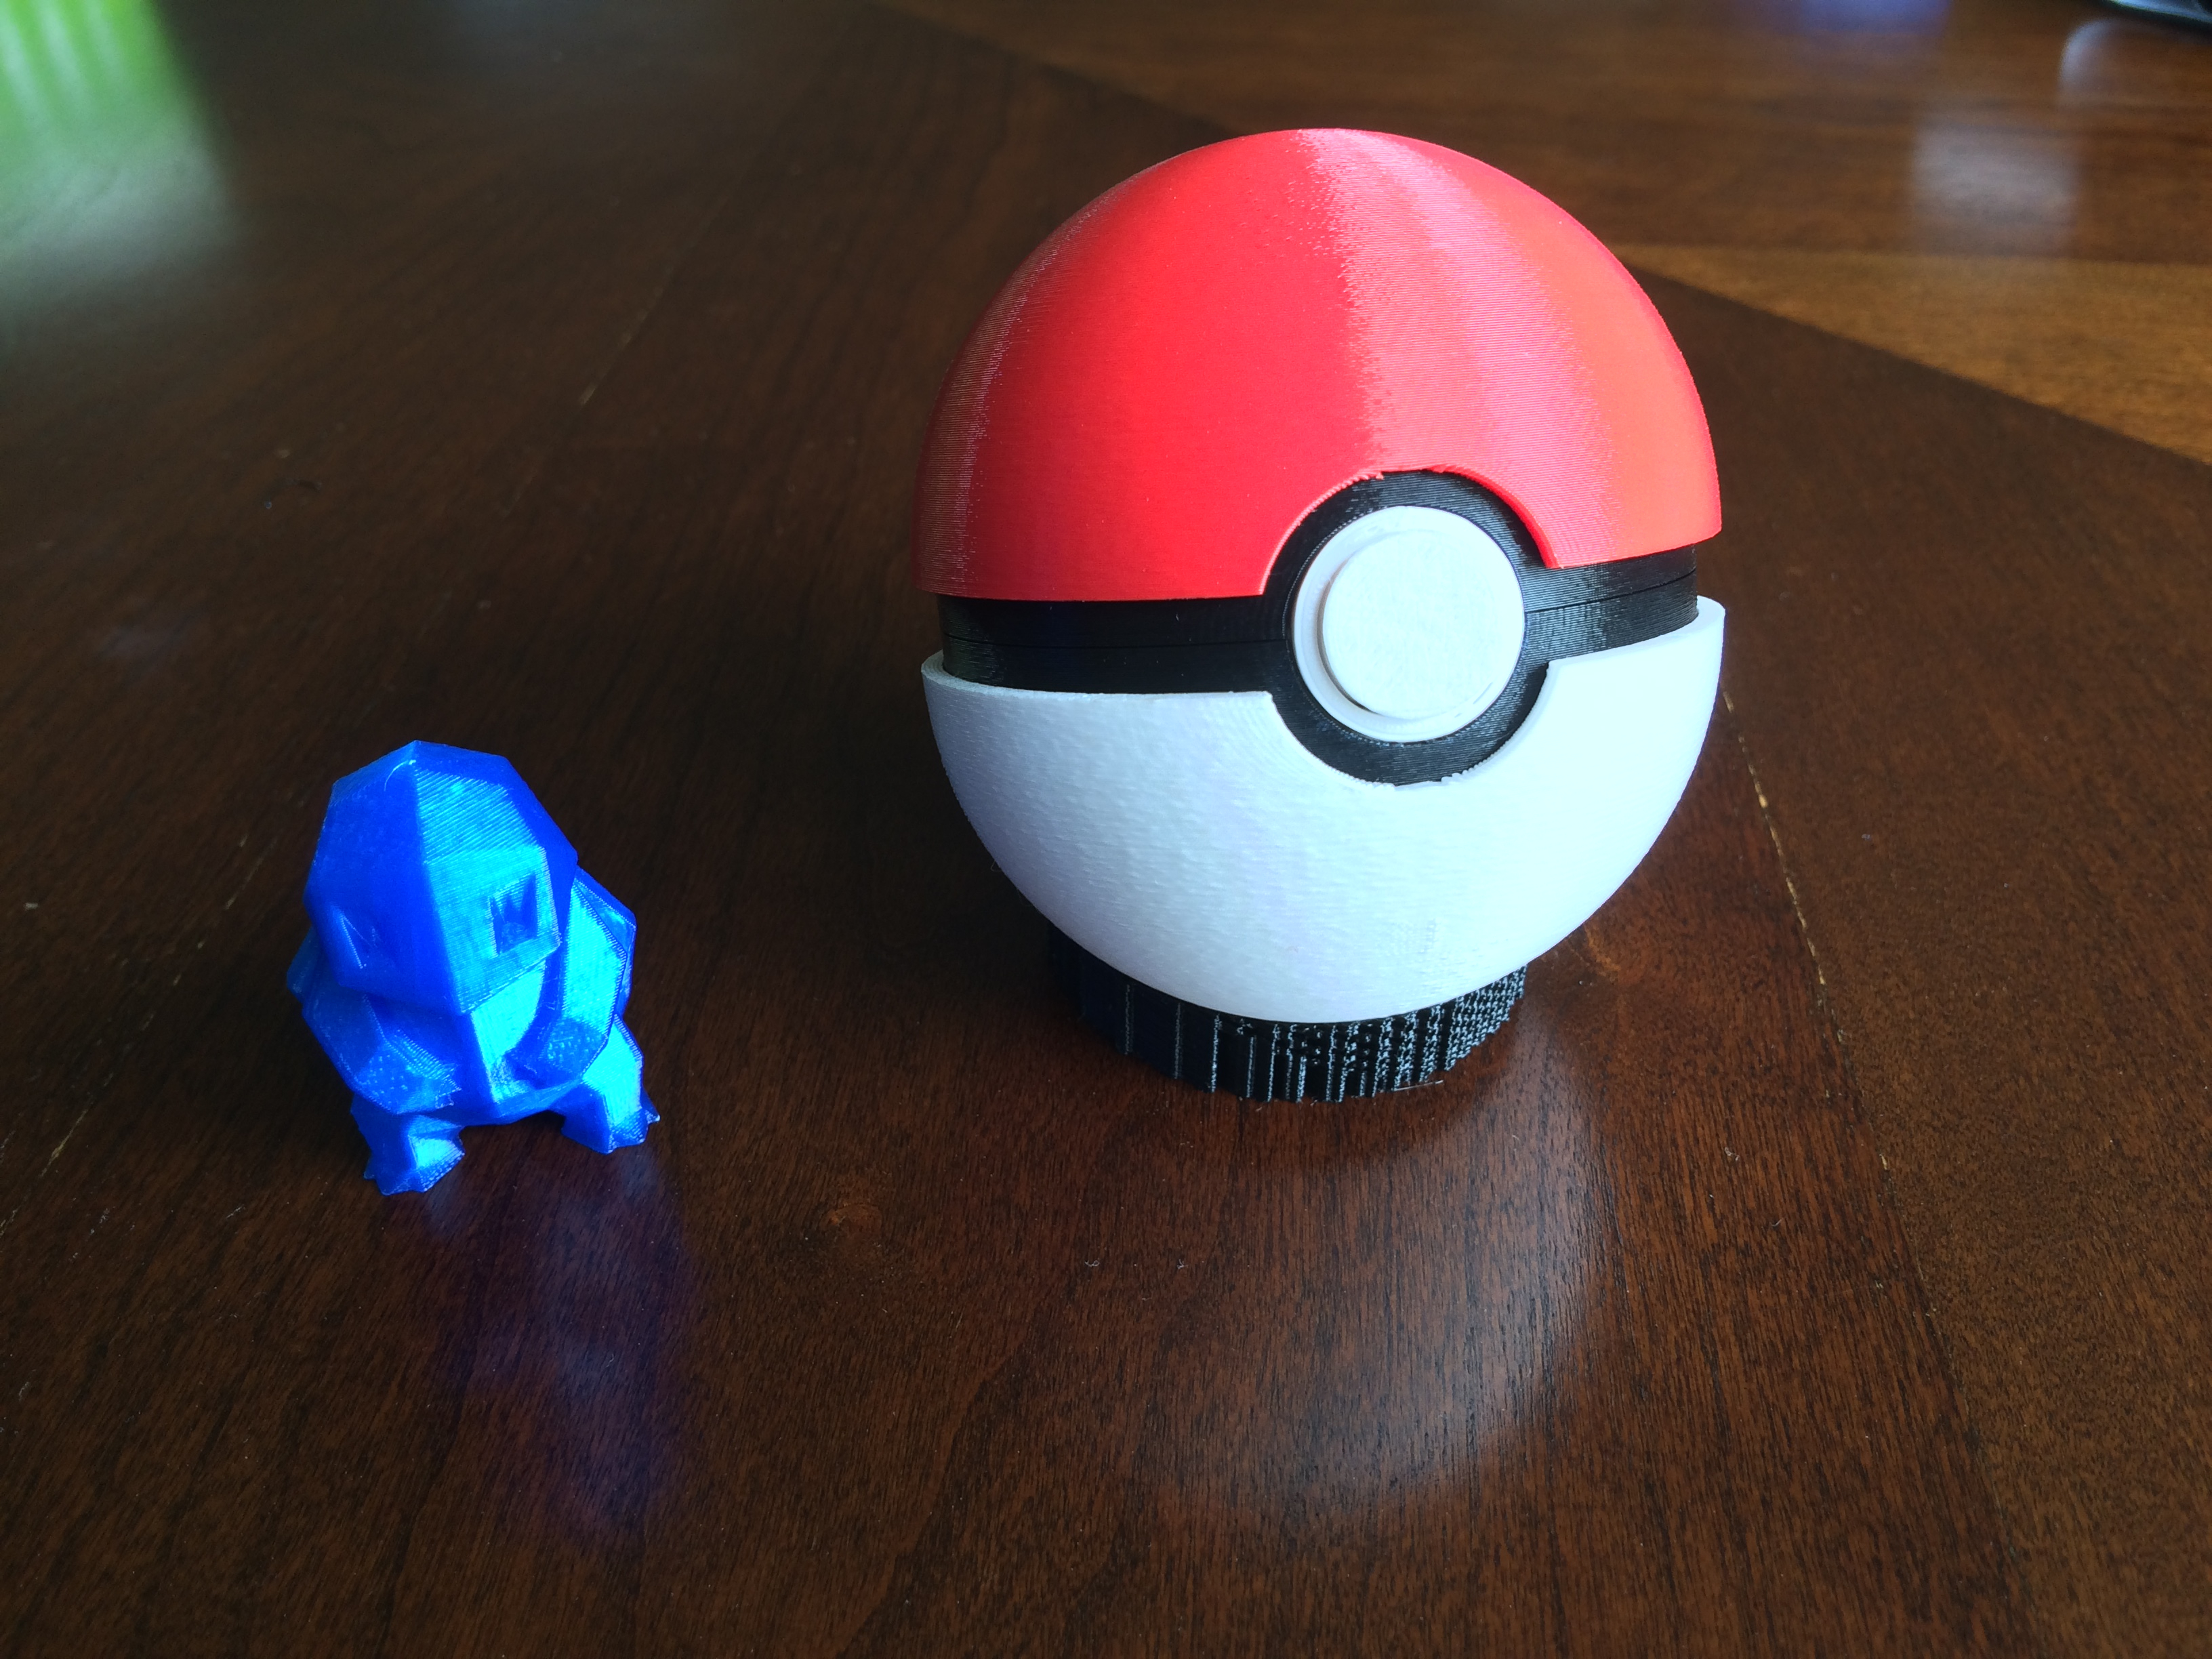 How To Make A Origami Pokeball That Opens Pokeball Opens And Closes Spragclutch Thingiverse